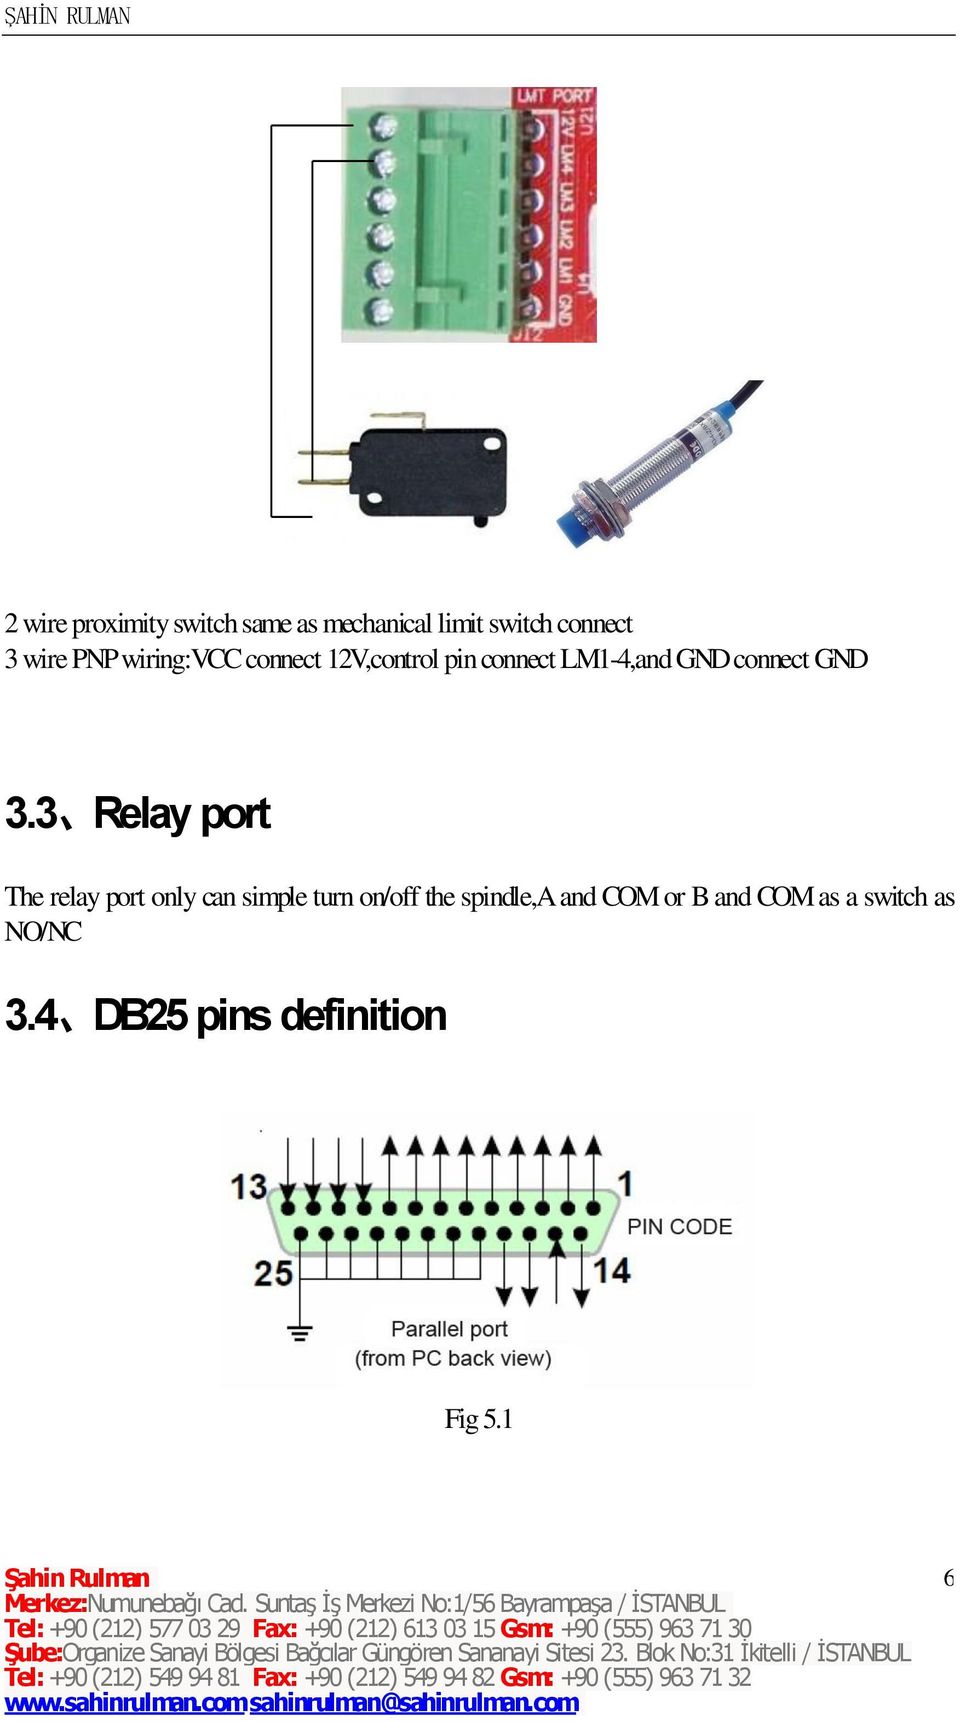 3.3 Relay port The relay port only can simple turn on/off the spindle,a